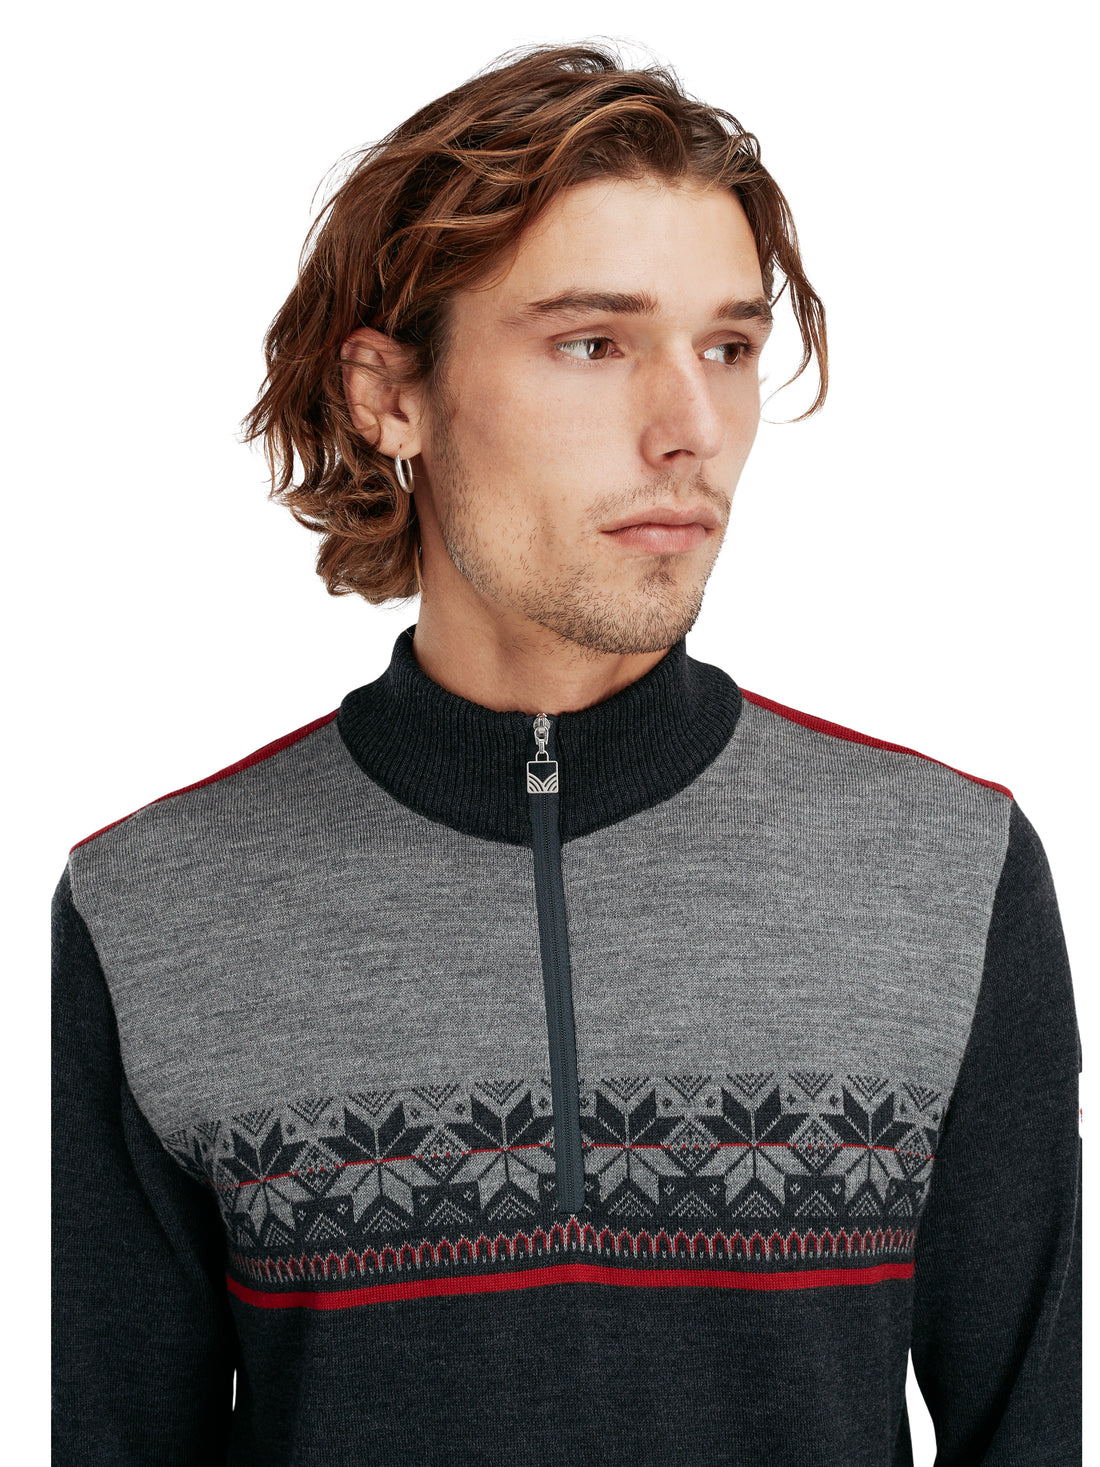 Dale of Norway - Liberg Men's Sweater - Charcoal